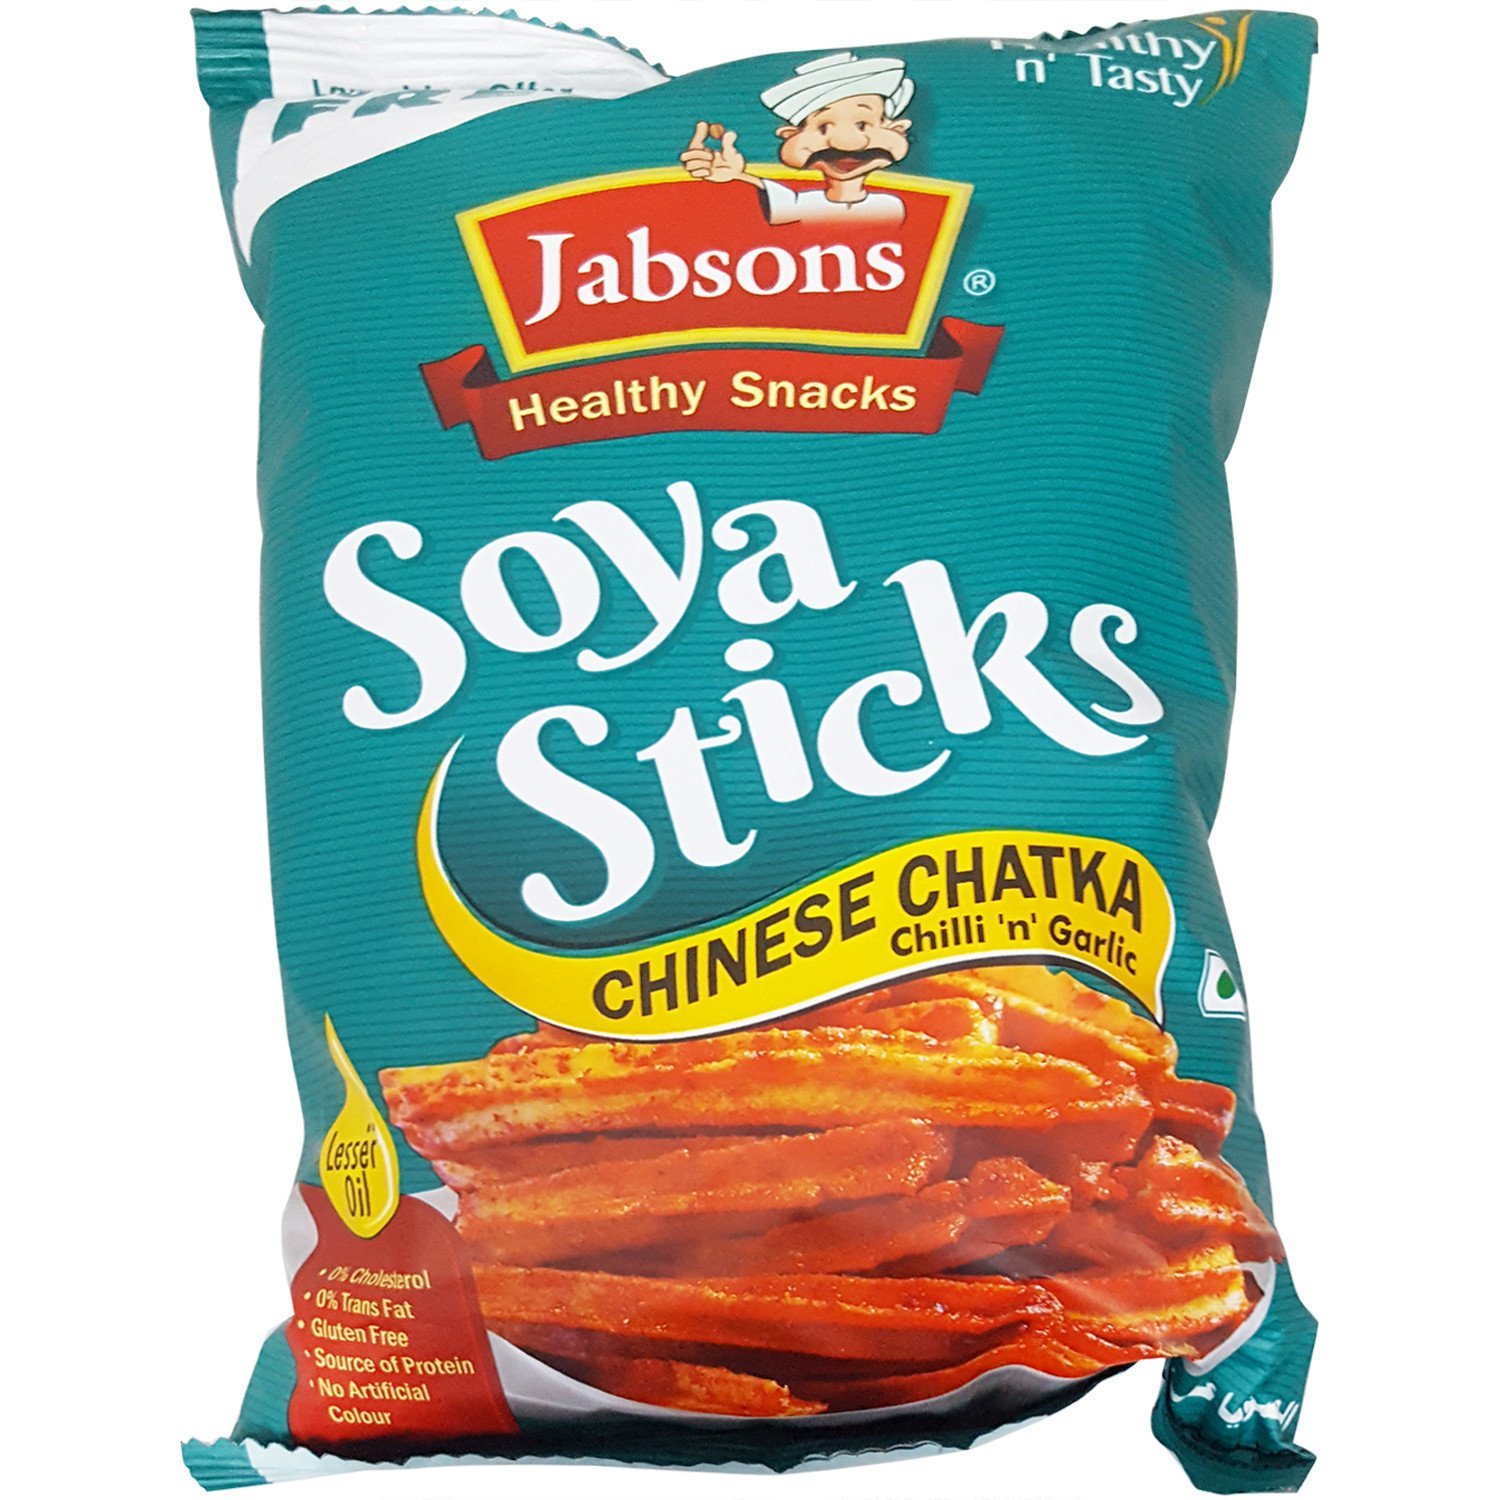 Jabsons Soya Sticks Chinese Chatka Flavour 180g